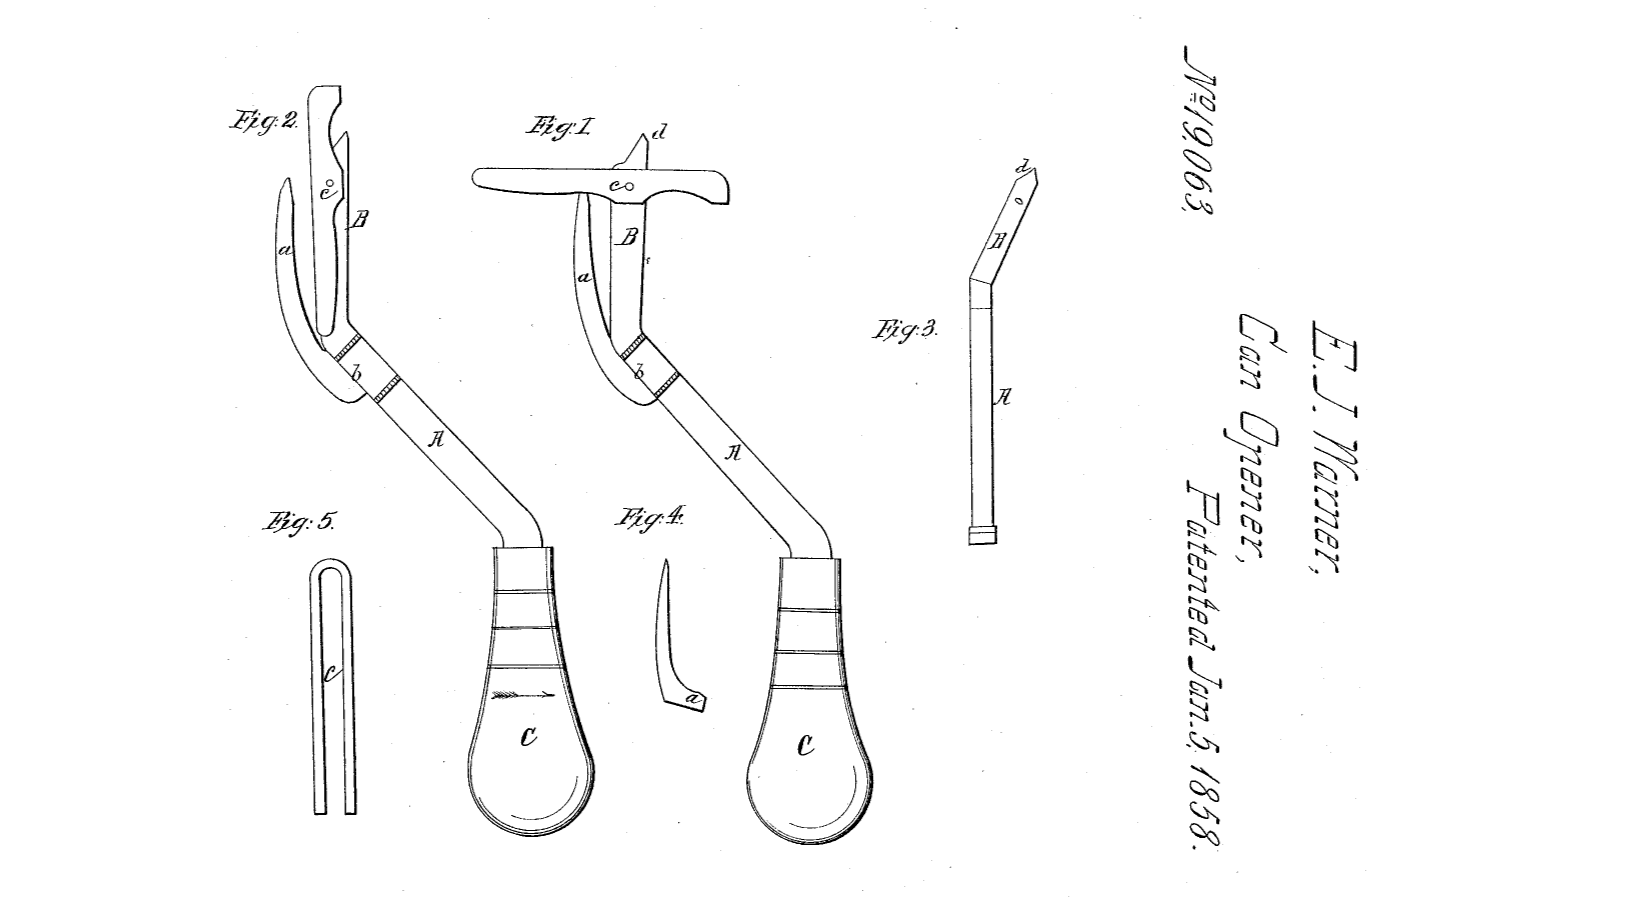 The first can opener design, showing a sharp, curved blade attached to a long arm, as designed by E. J. Warner and patented January 5, 1858.